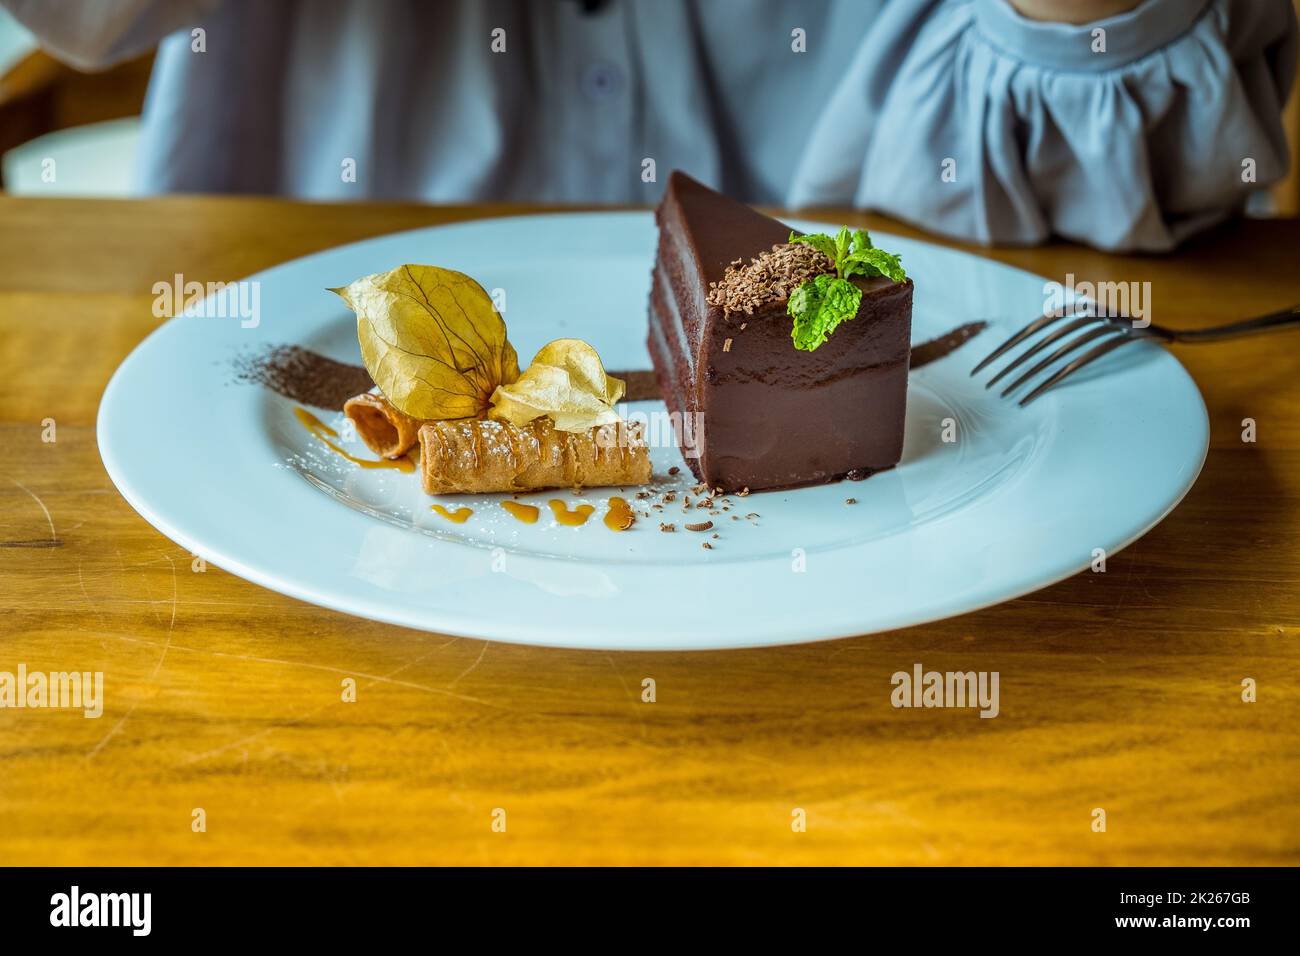 The Perfect Chocolate Cake. Slice of delicious chocolate cake decoration with fruit Stock Photo